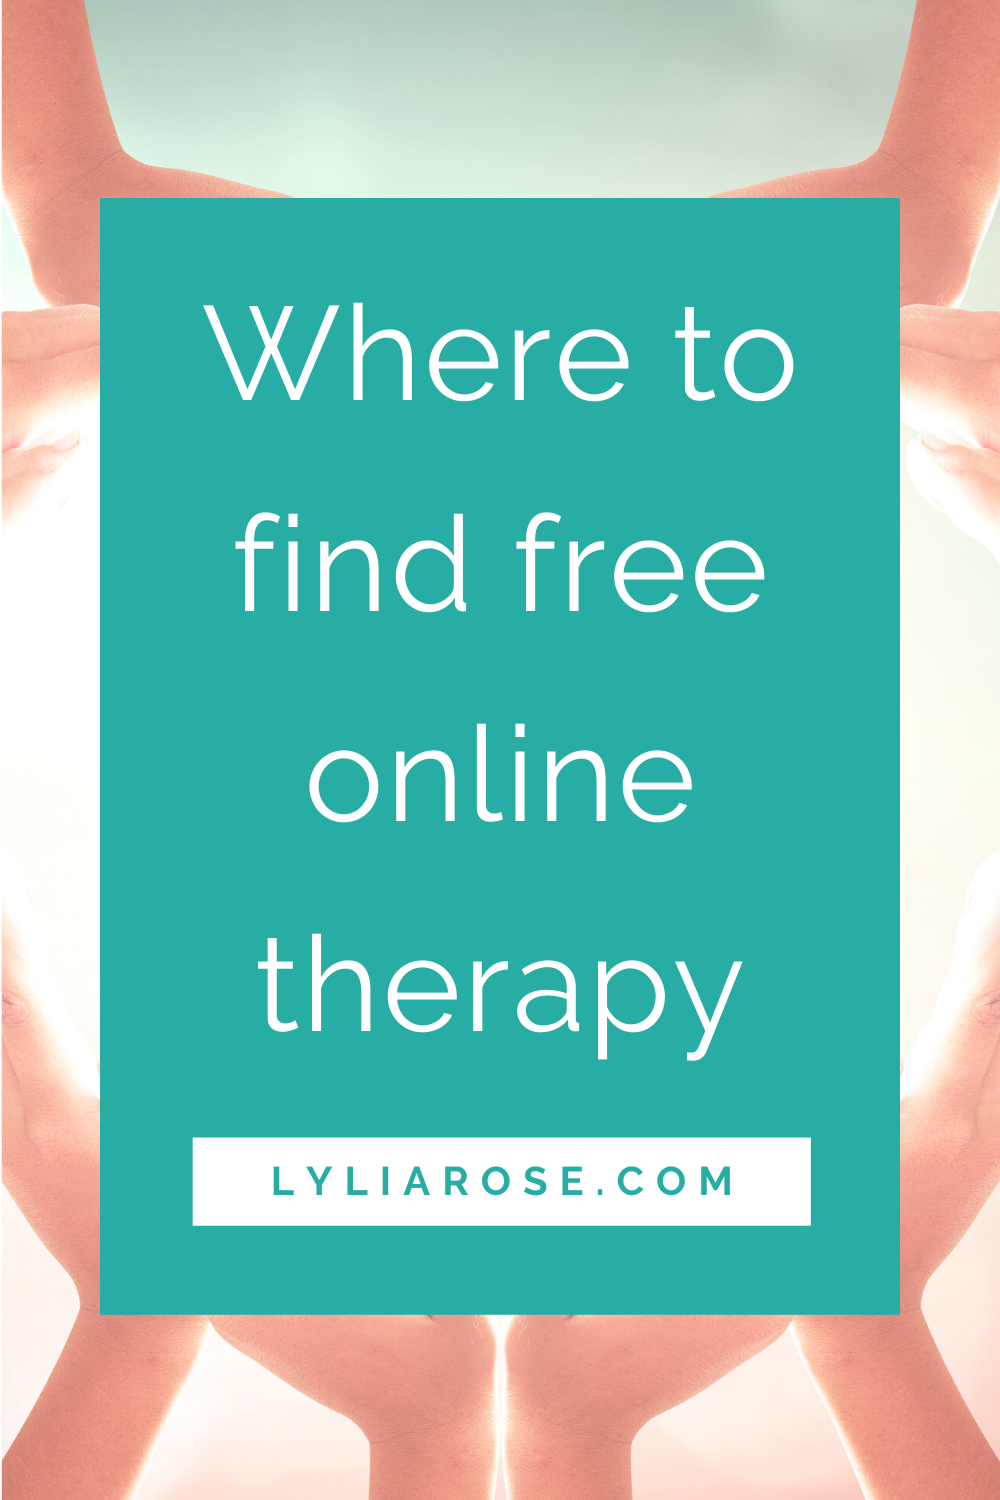 Where to find free online therapy